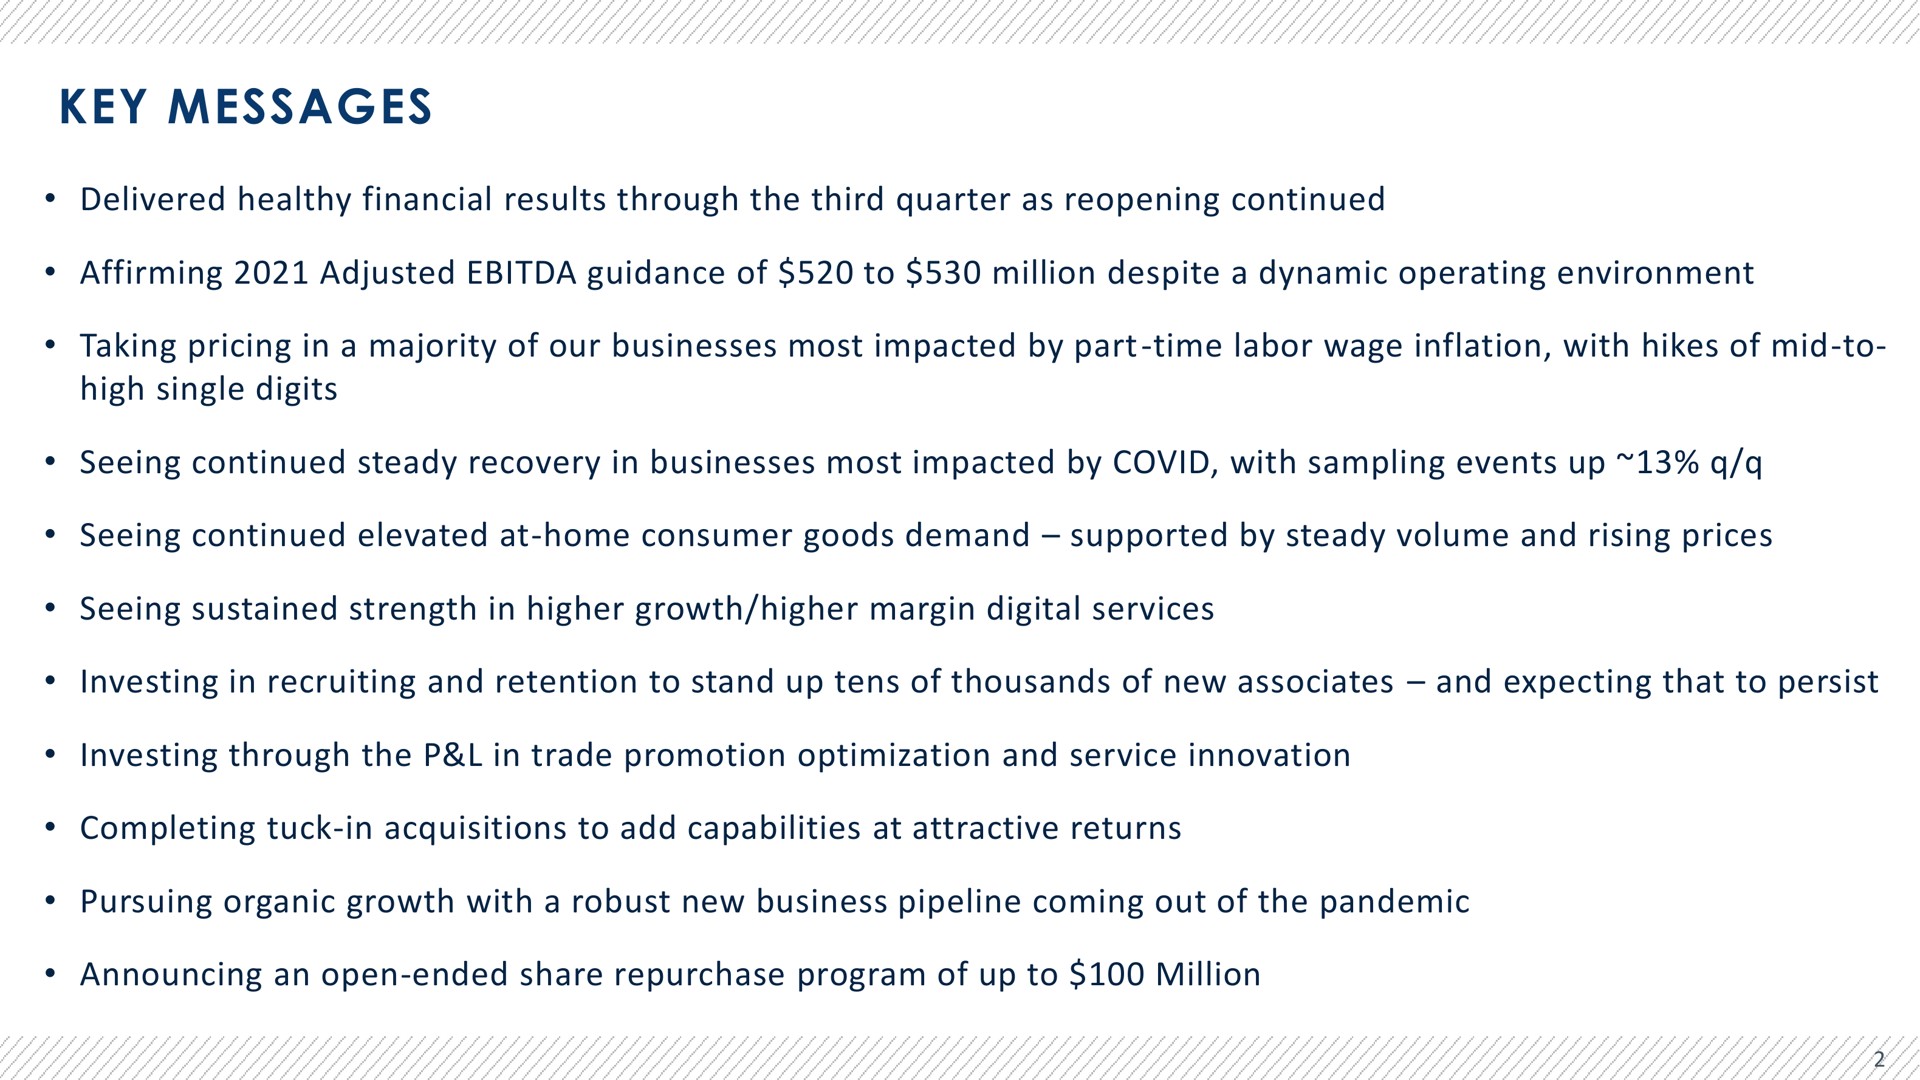 key messages delivered healthy financial results through the third quarter as reopening continued affirming adjusted guidance of to million despite a dynamic operating environment taking pricing in a majority of our businesses most impacted by part time labor wage inflation with hikes of mid to high single digits seeing continued steady recovery in businesses most impacted by covid with sampling events up seeing continued elevated at home consumer goods demand supported by steady volume and rising prices seeing sustained strength in higher growth higher margin digital services investing in recruiting and retention to stand up tens of thousands of new associates and expecting that to persist investing through the in trade promotion optimization and service innovation completing tuck in acquisitions to add capabilities at attractive returns pursuing organic growth with a robust new business pipeline coming out of the pandemic announcing an open ended share repurchase program of up to million | Advantage Solutions